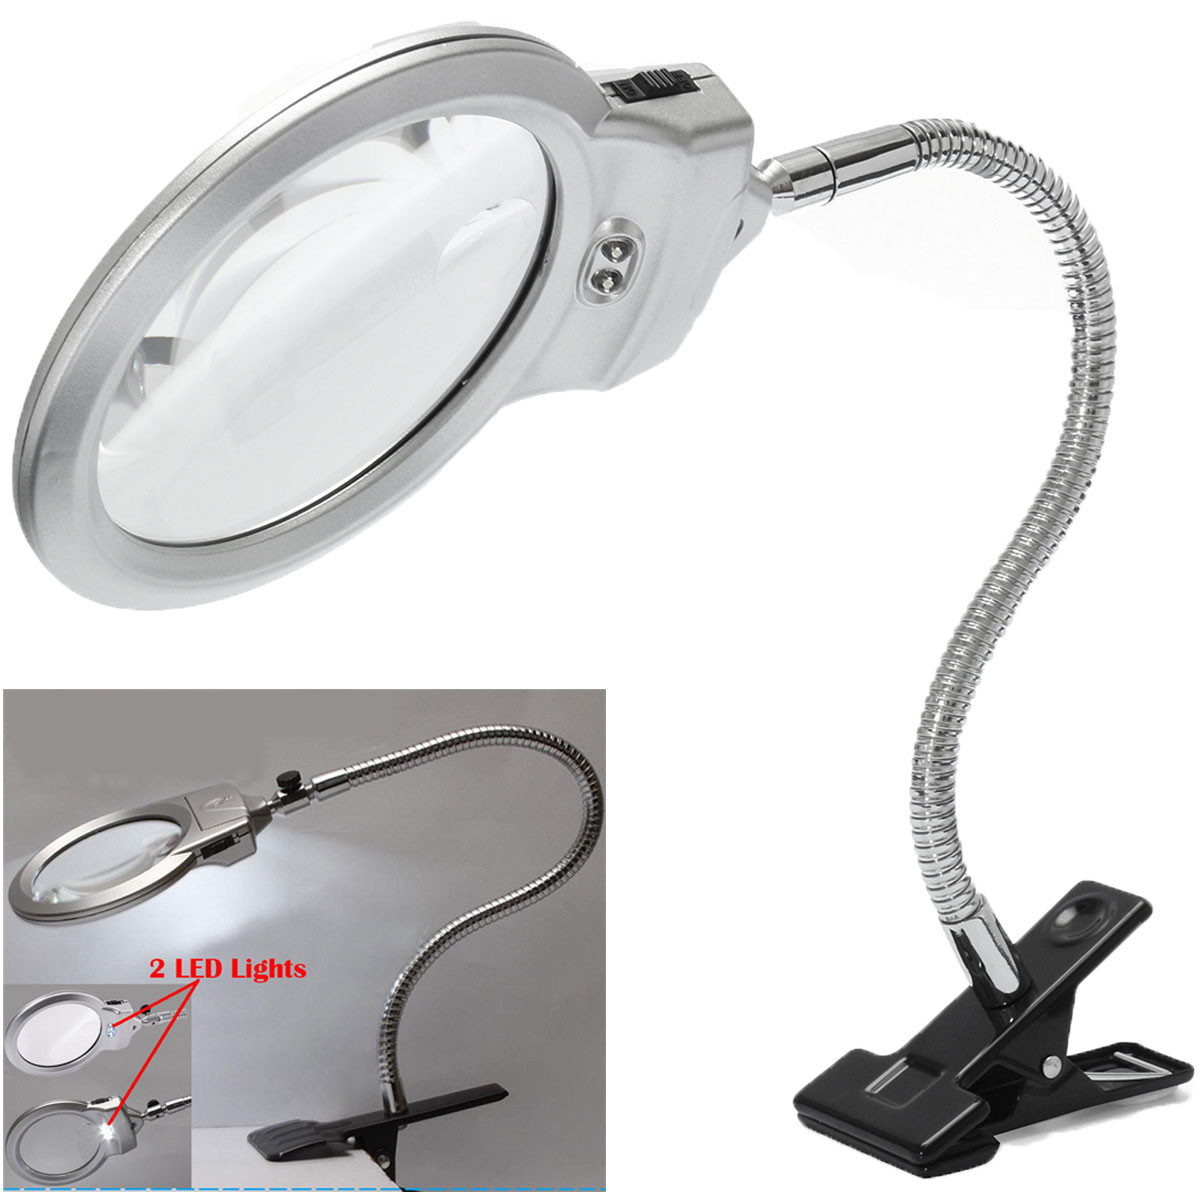 New-25-x-90MM-5-x-22MM-2-LED-Lighted-Table-Top-Desk-Magnifier-Magnifying-Glass-with-Clamp-1075605